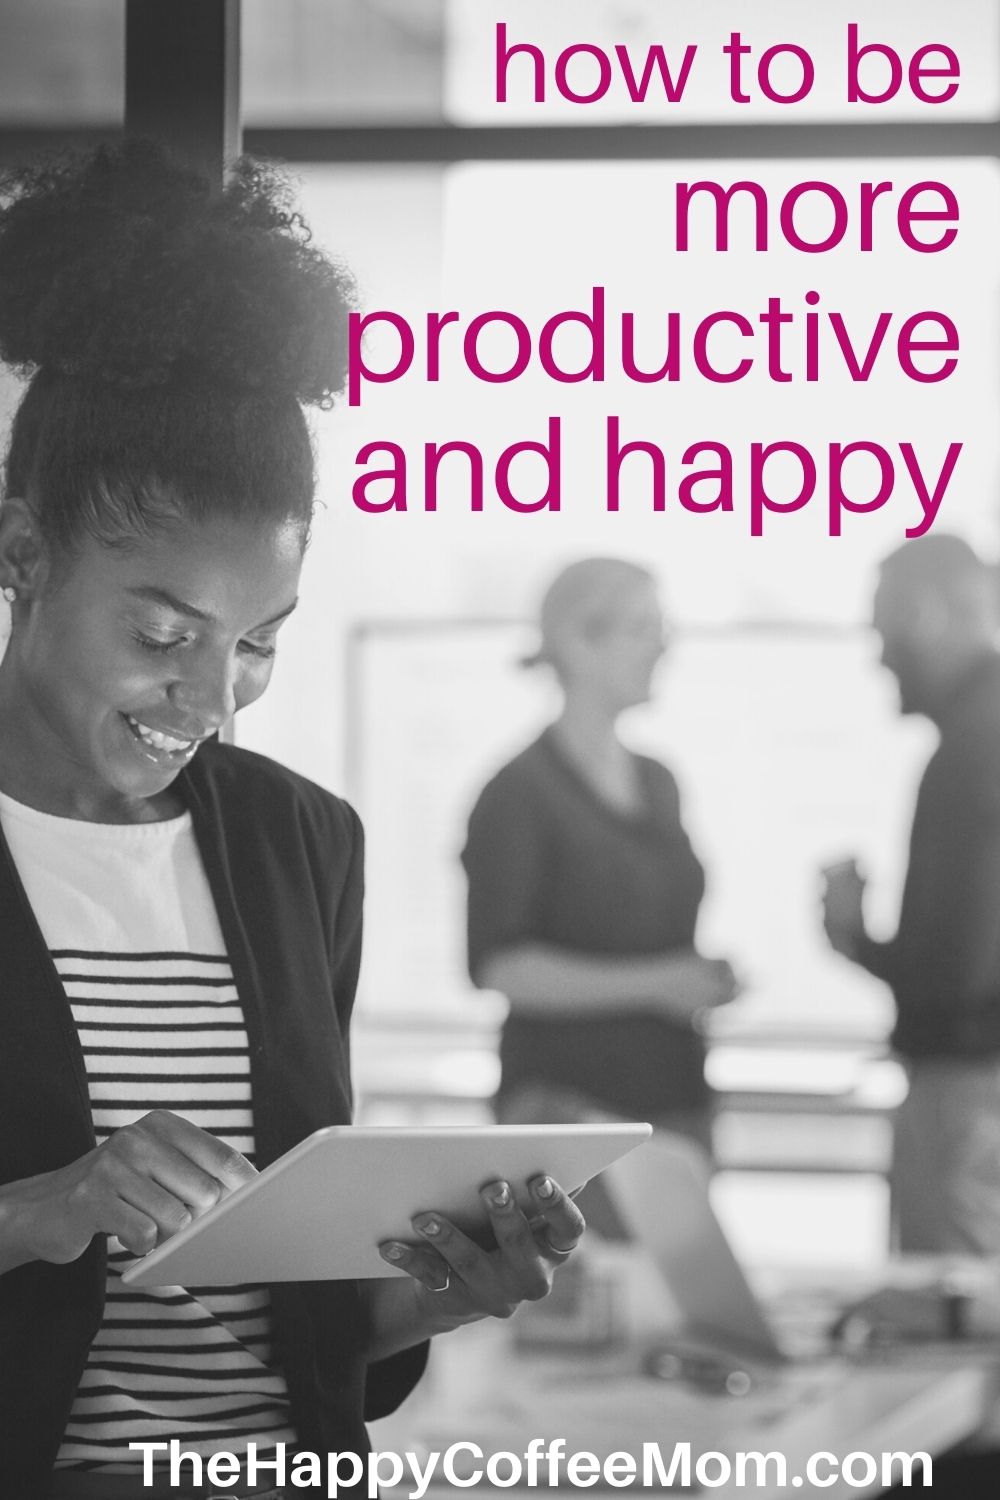 How to Be More Productive and Happy